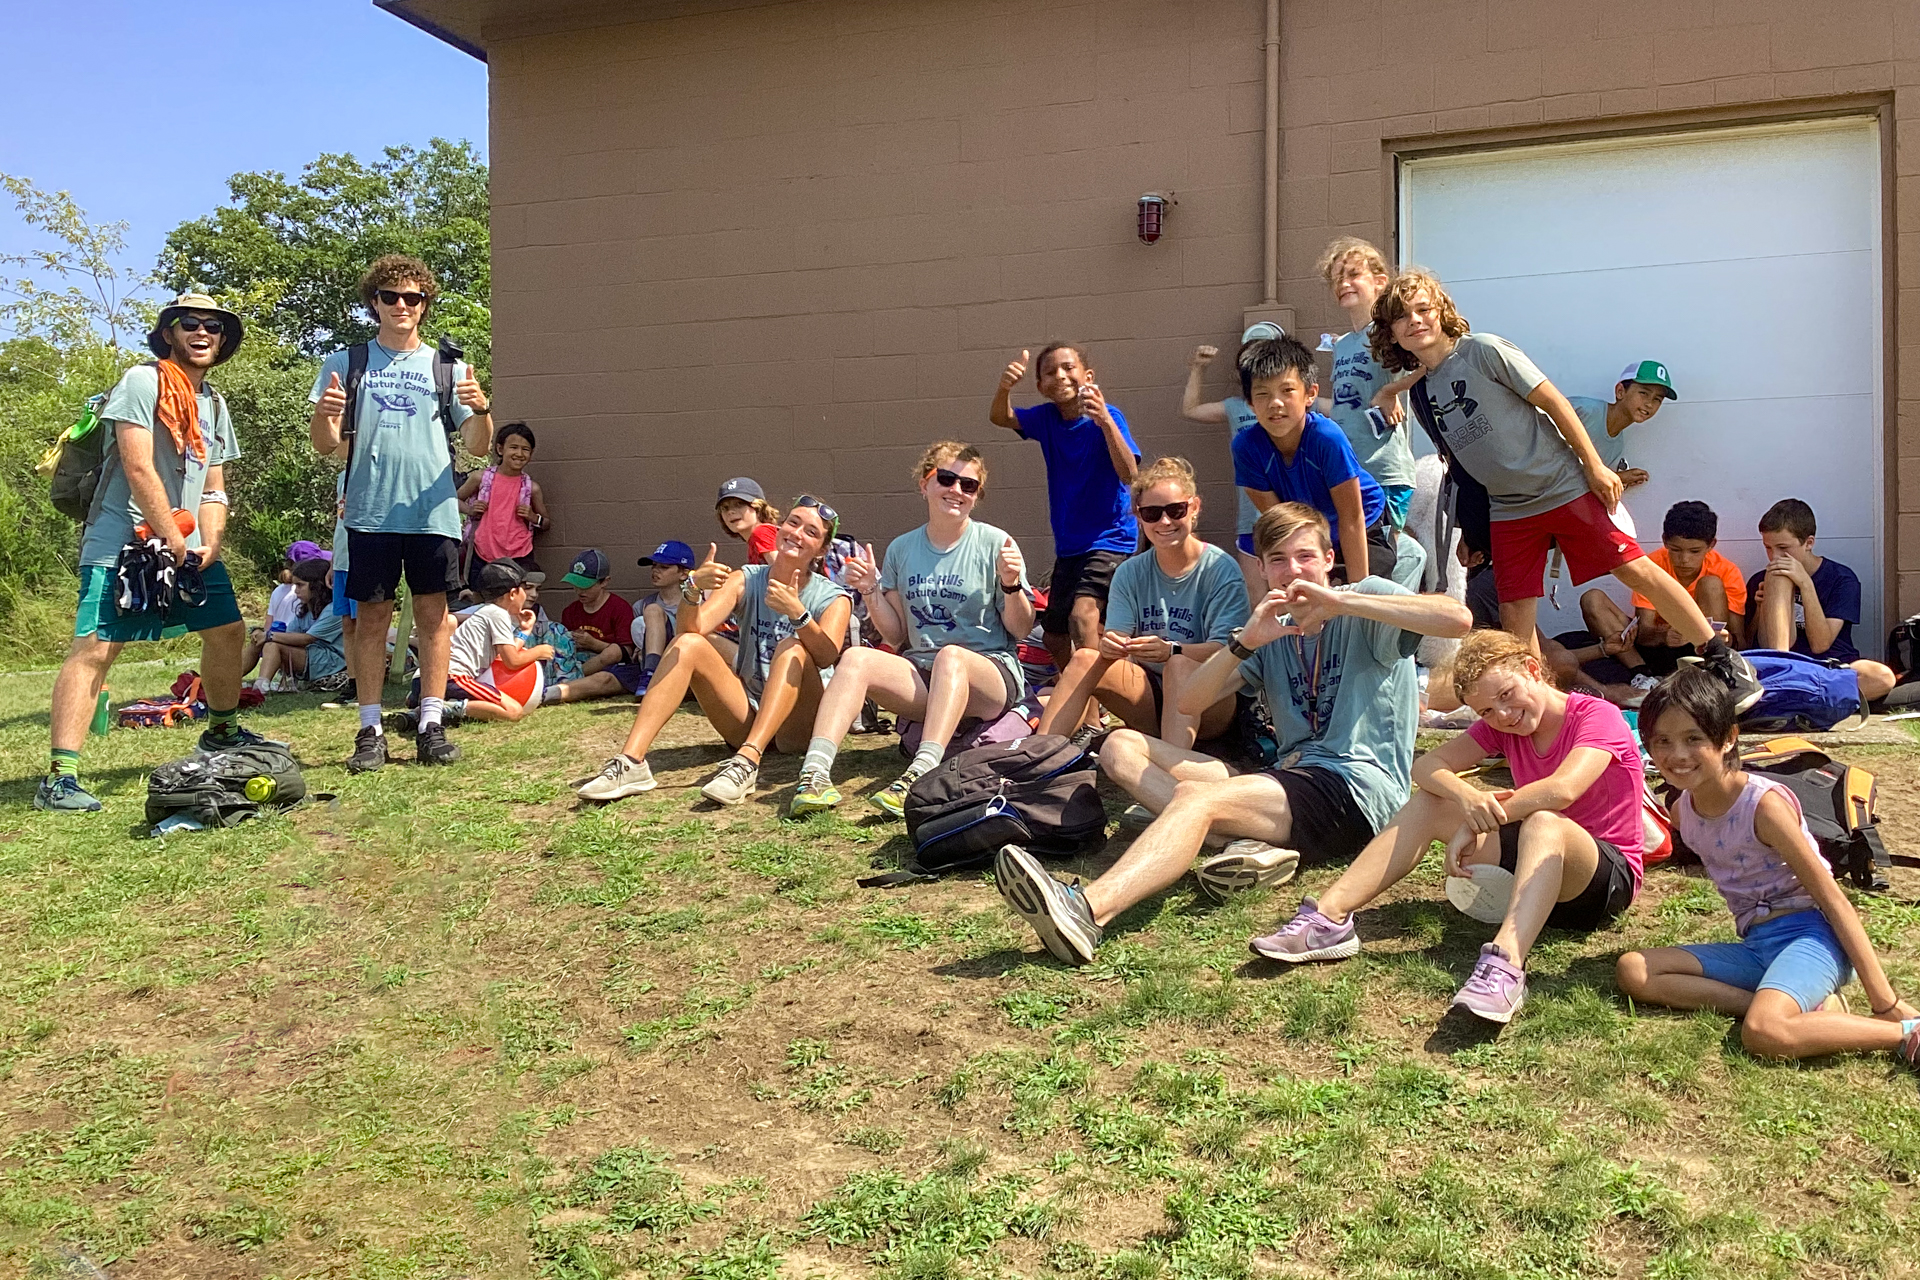 A group of smiling Blue Hills campers and counselors pose in front of a cinderblock building